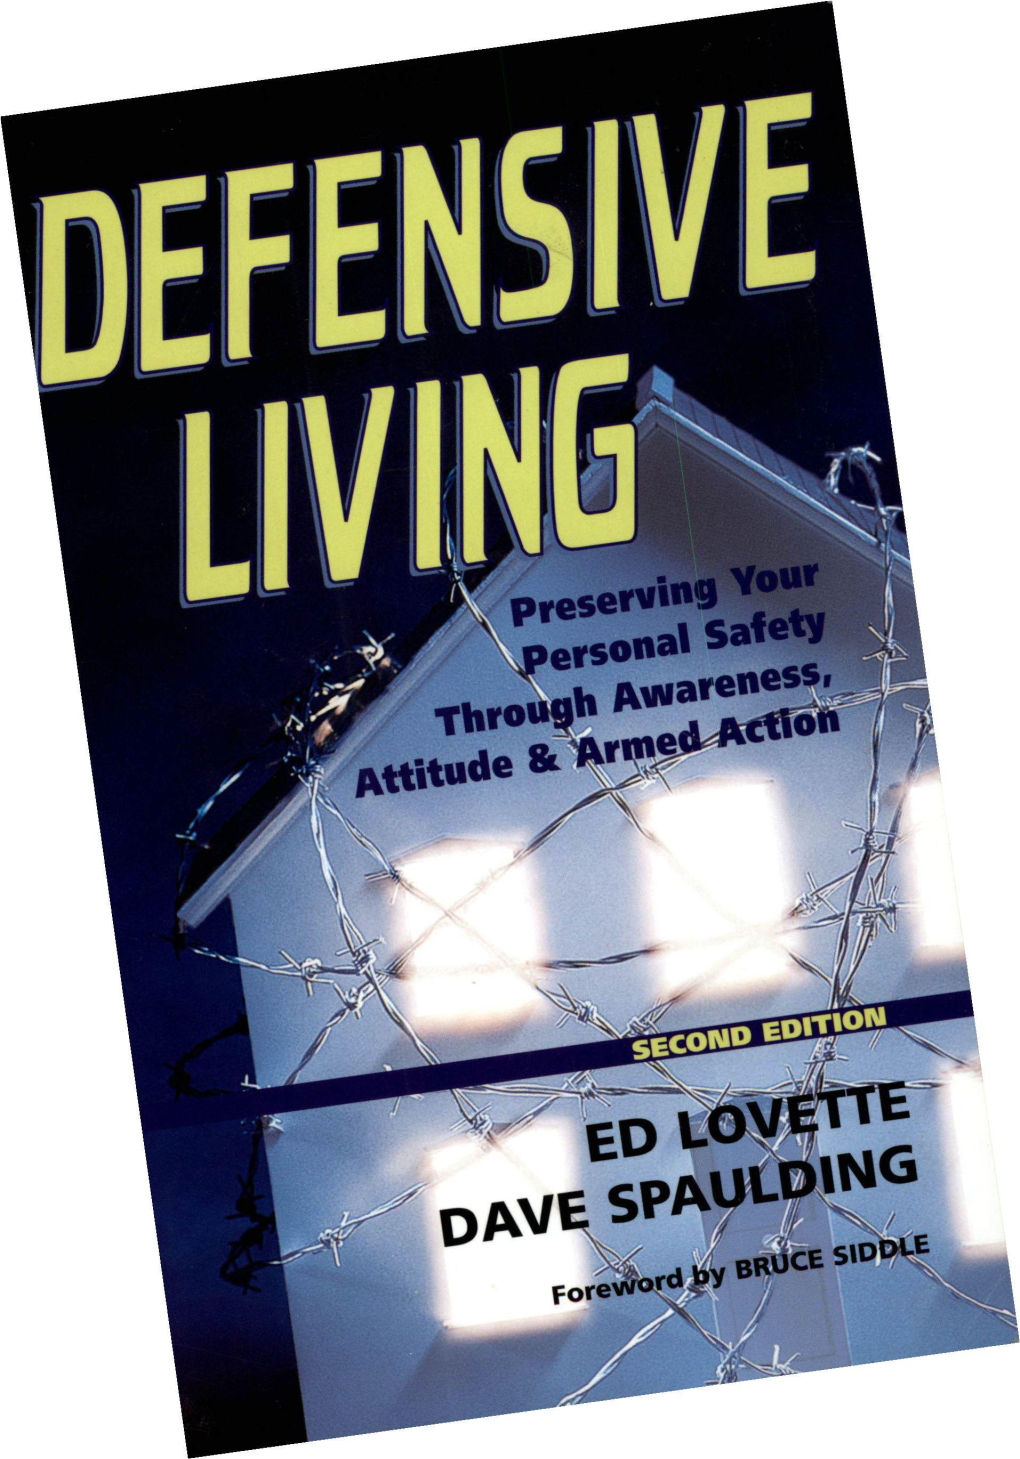 Defensive Living Preserving Your Personal Safety Through Awareness, Attitude and Armed Action